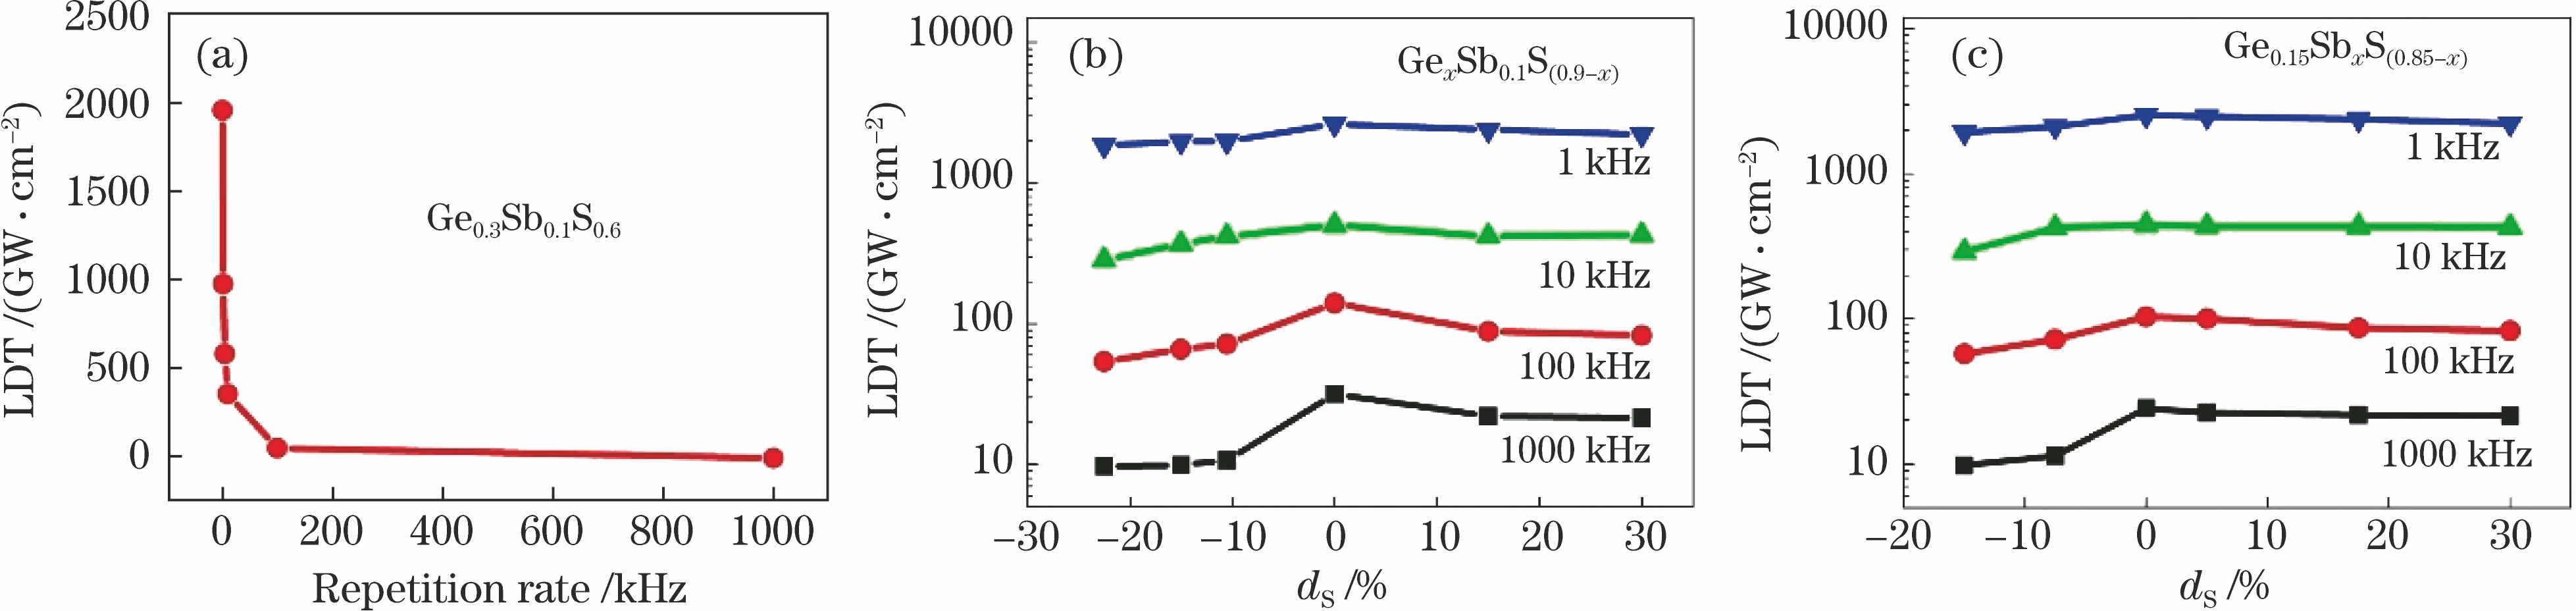 Evolution of LDT of Ge-Sb-S glass. (a) Correlation between LDT of Ge0.3Sb0.1S0.6 glass and repetition rate of irradiating pulse; (b) correlation between composition and LDT of GexSb0.1S0.9-x glass; (c) correlation between composition and LDT of Ge0.15SbxS0.85-x glass